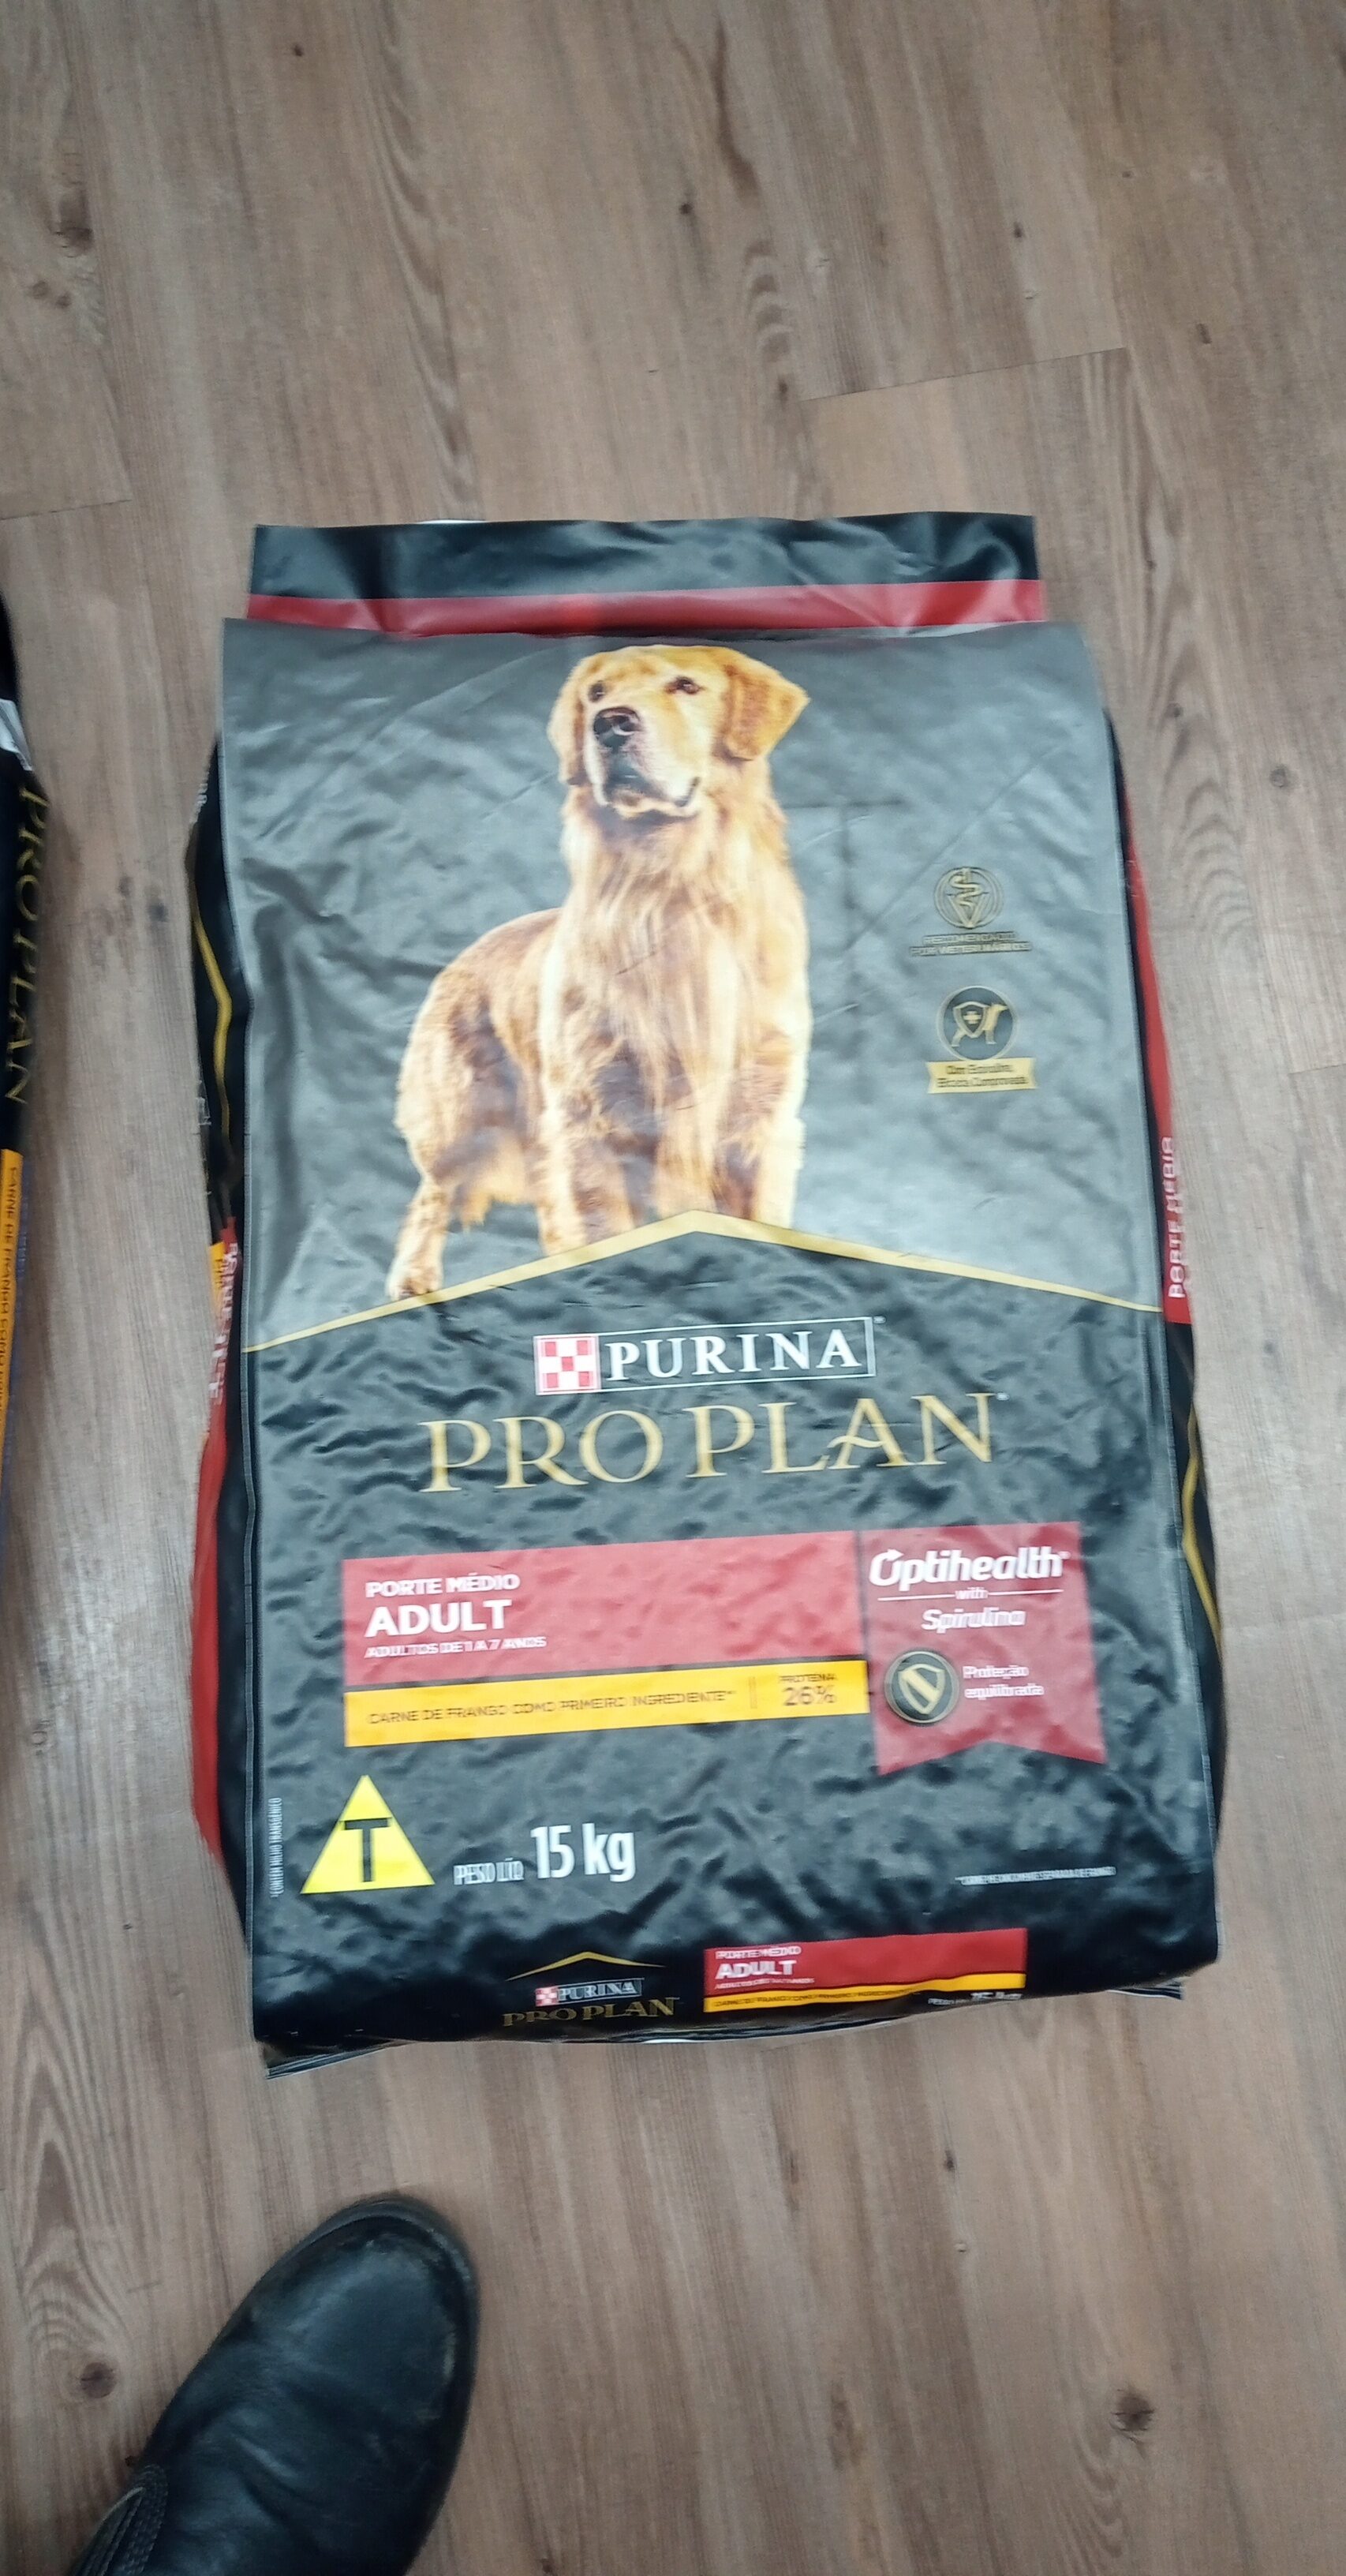 Proplan adulto 1 a 7anos - Product - pt